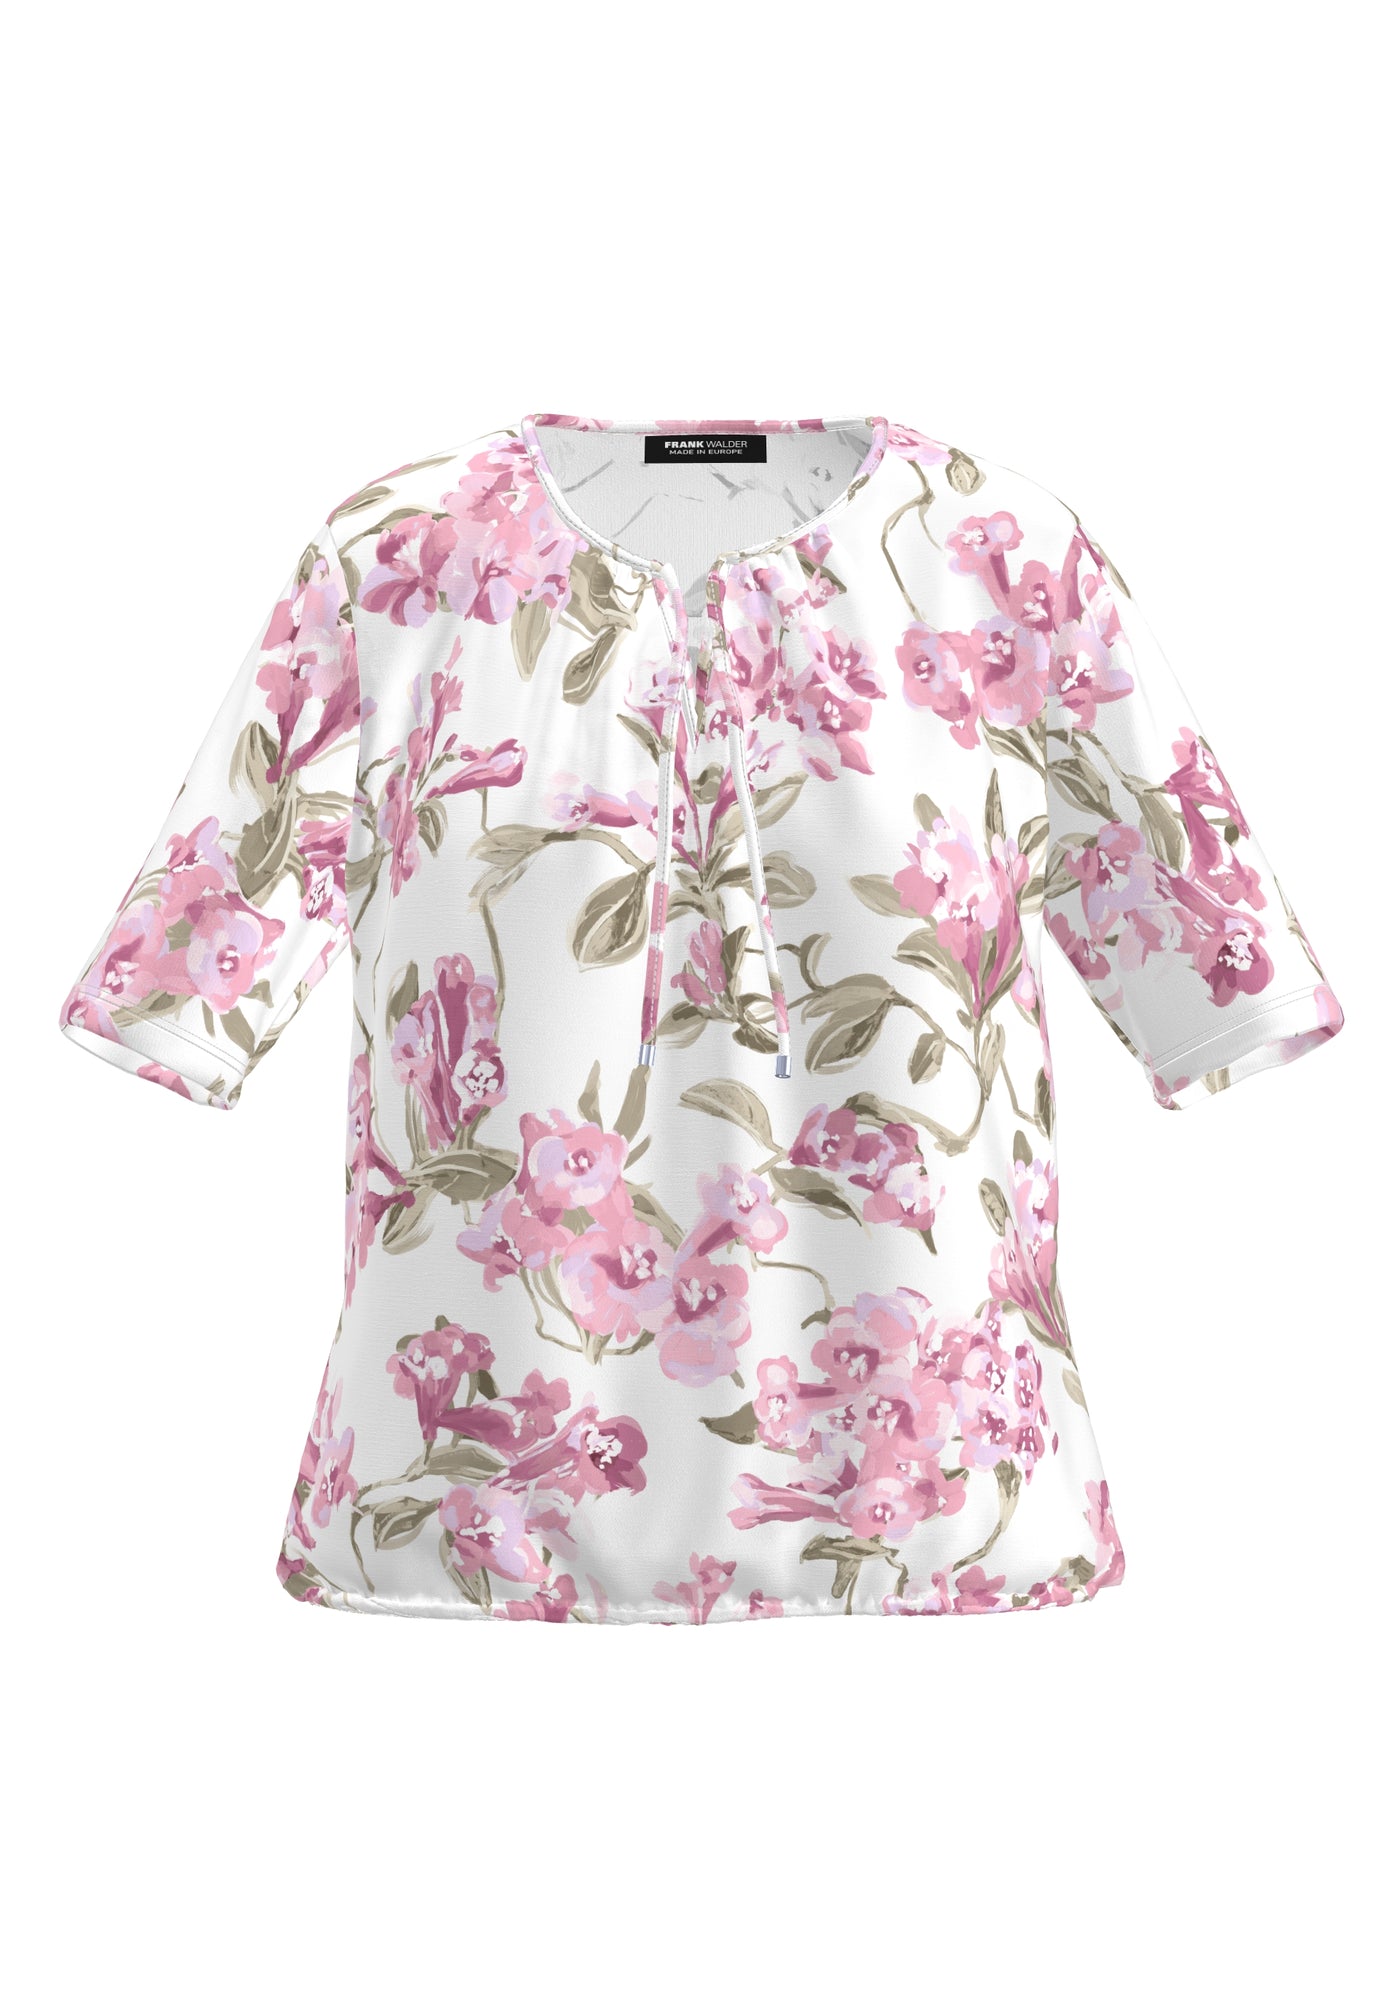 Floral Print Short Sleeve Top With Drawstrings